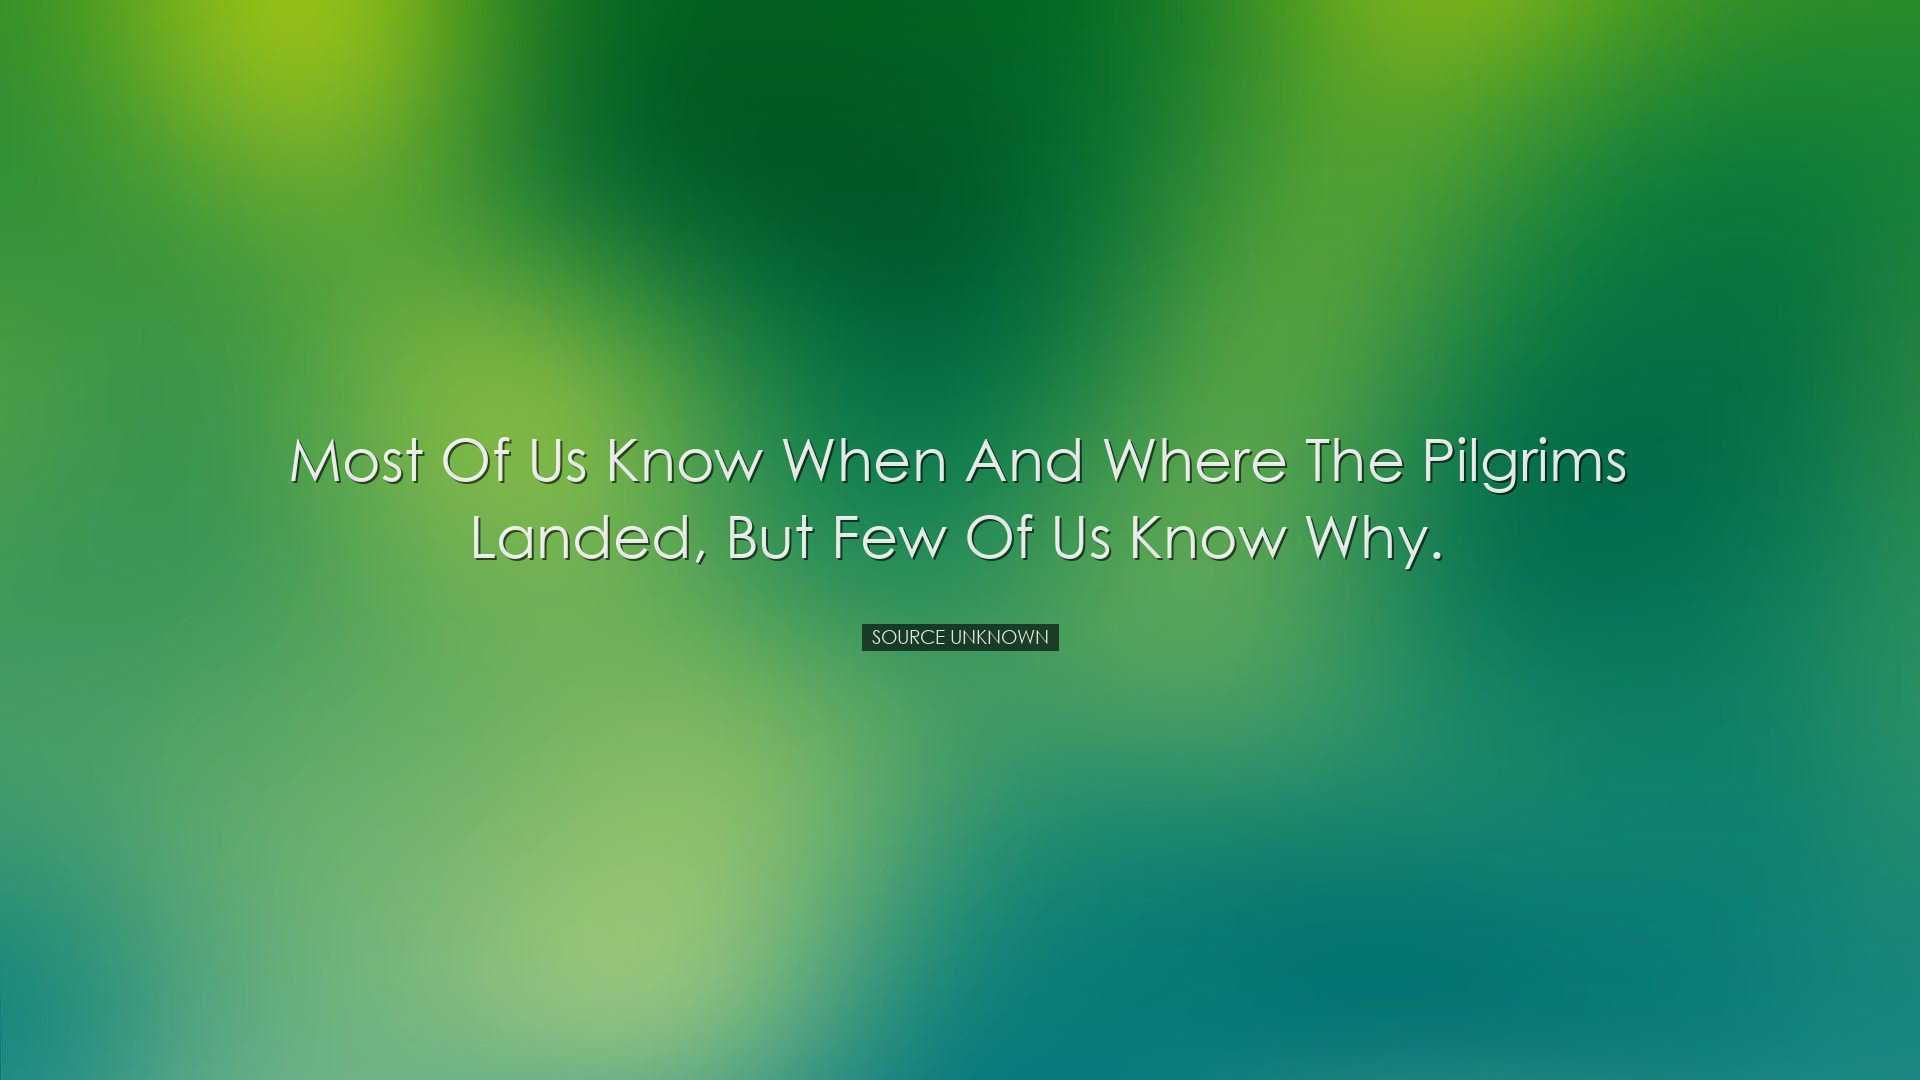 Most of us know when and where the Pilgrims landed, but few of us